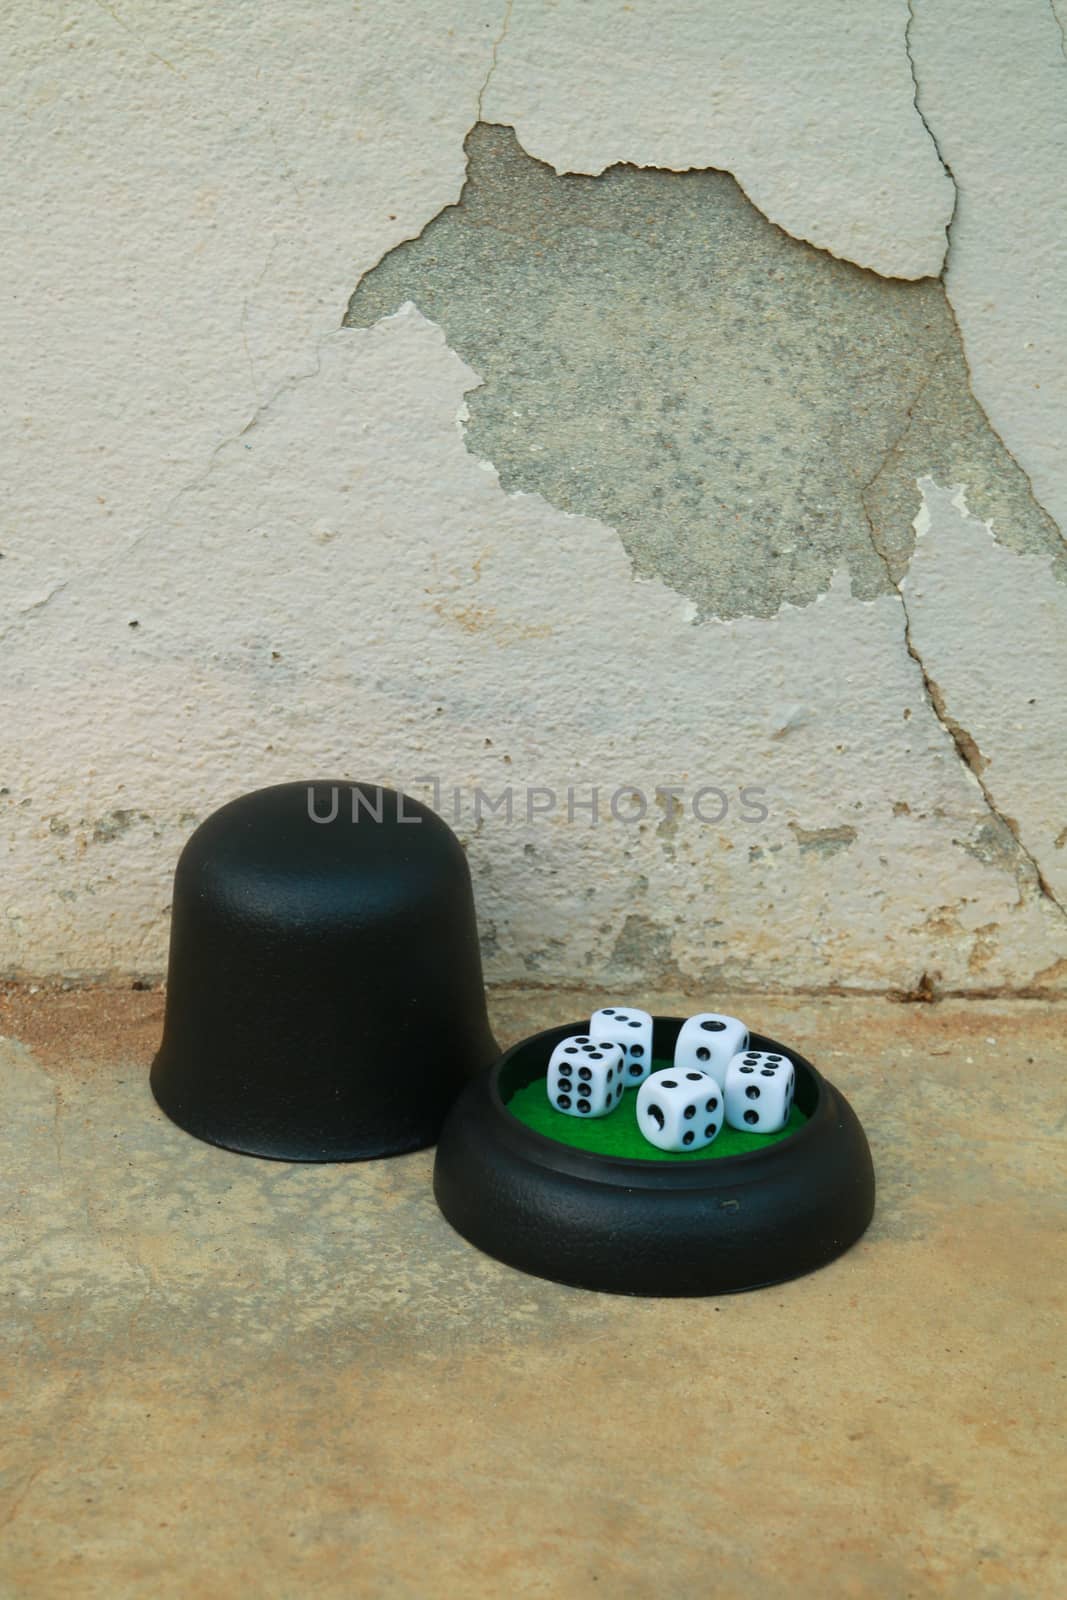 Dice set and crack wall by kaidevil